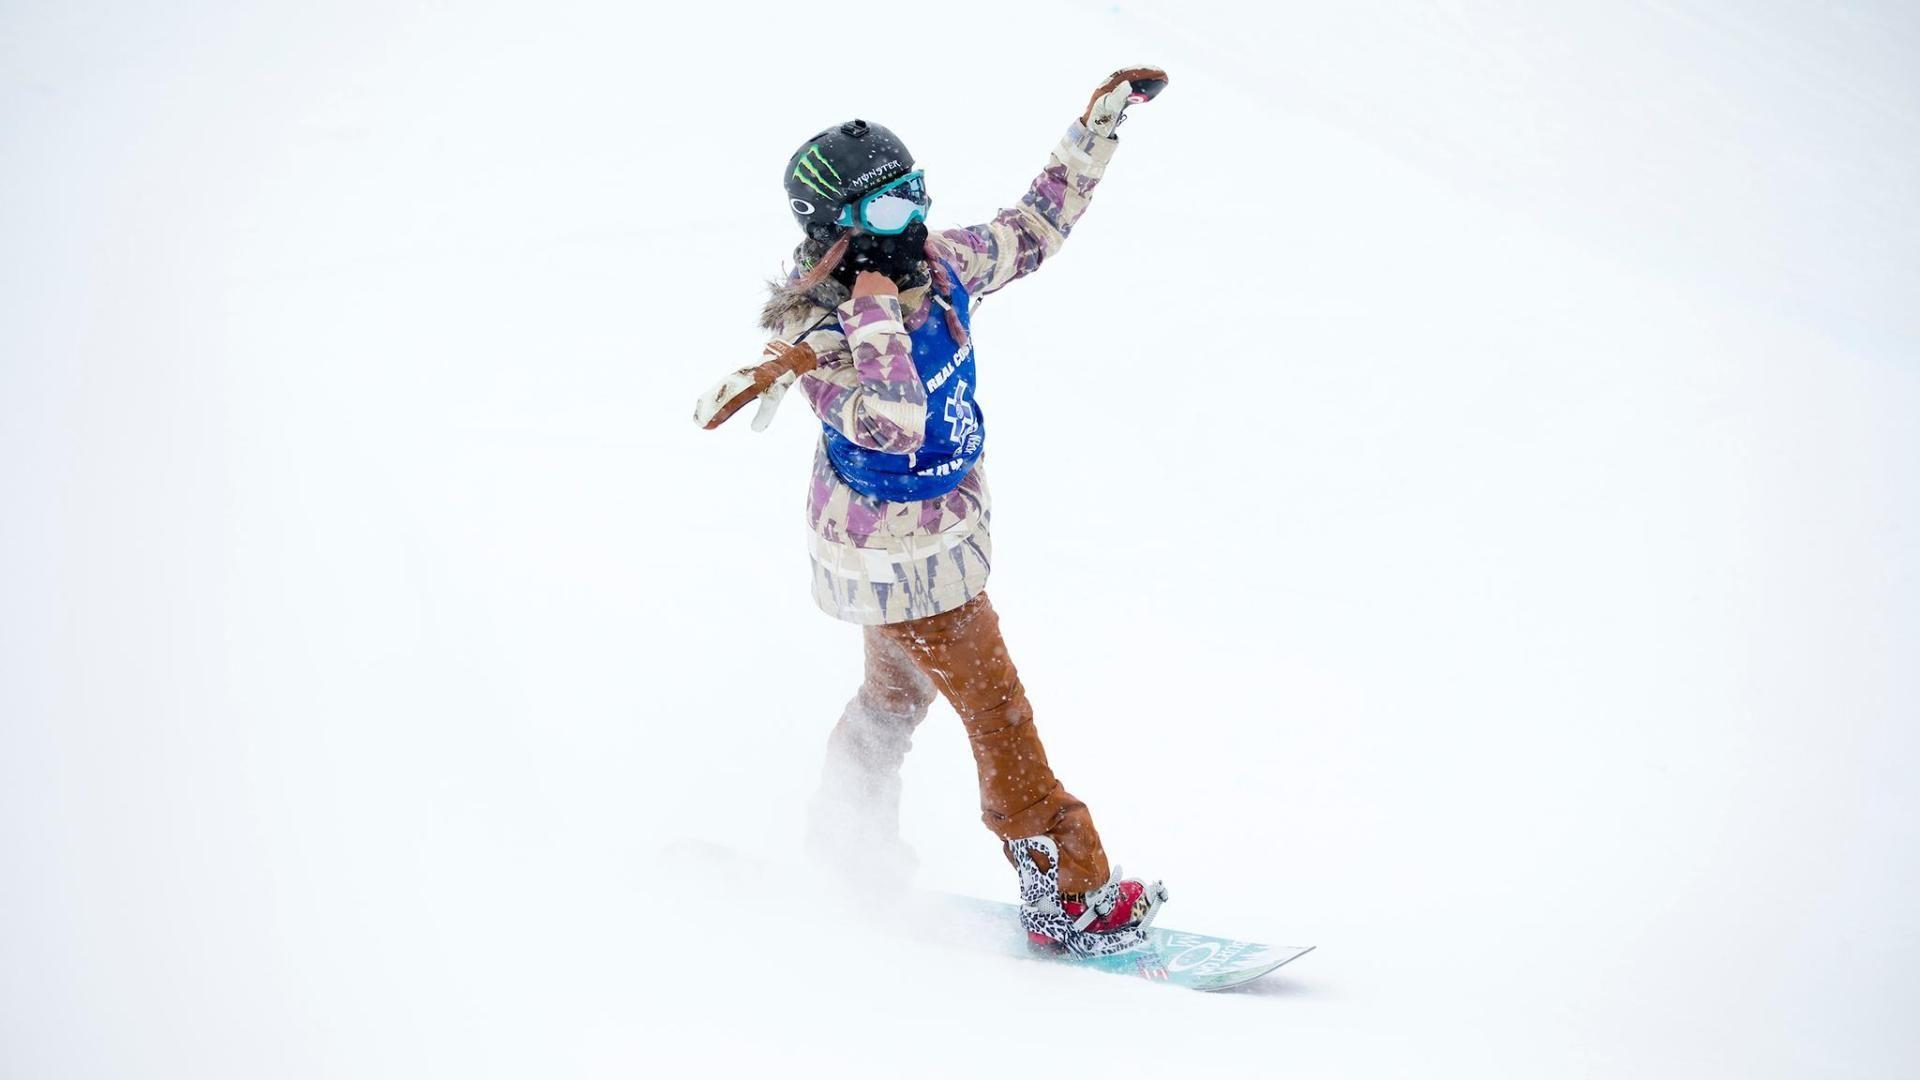 Chloe Kim's official X Games athlete biography